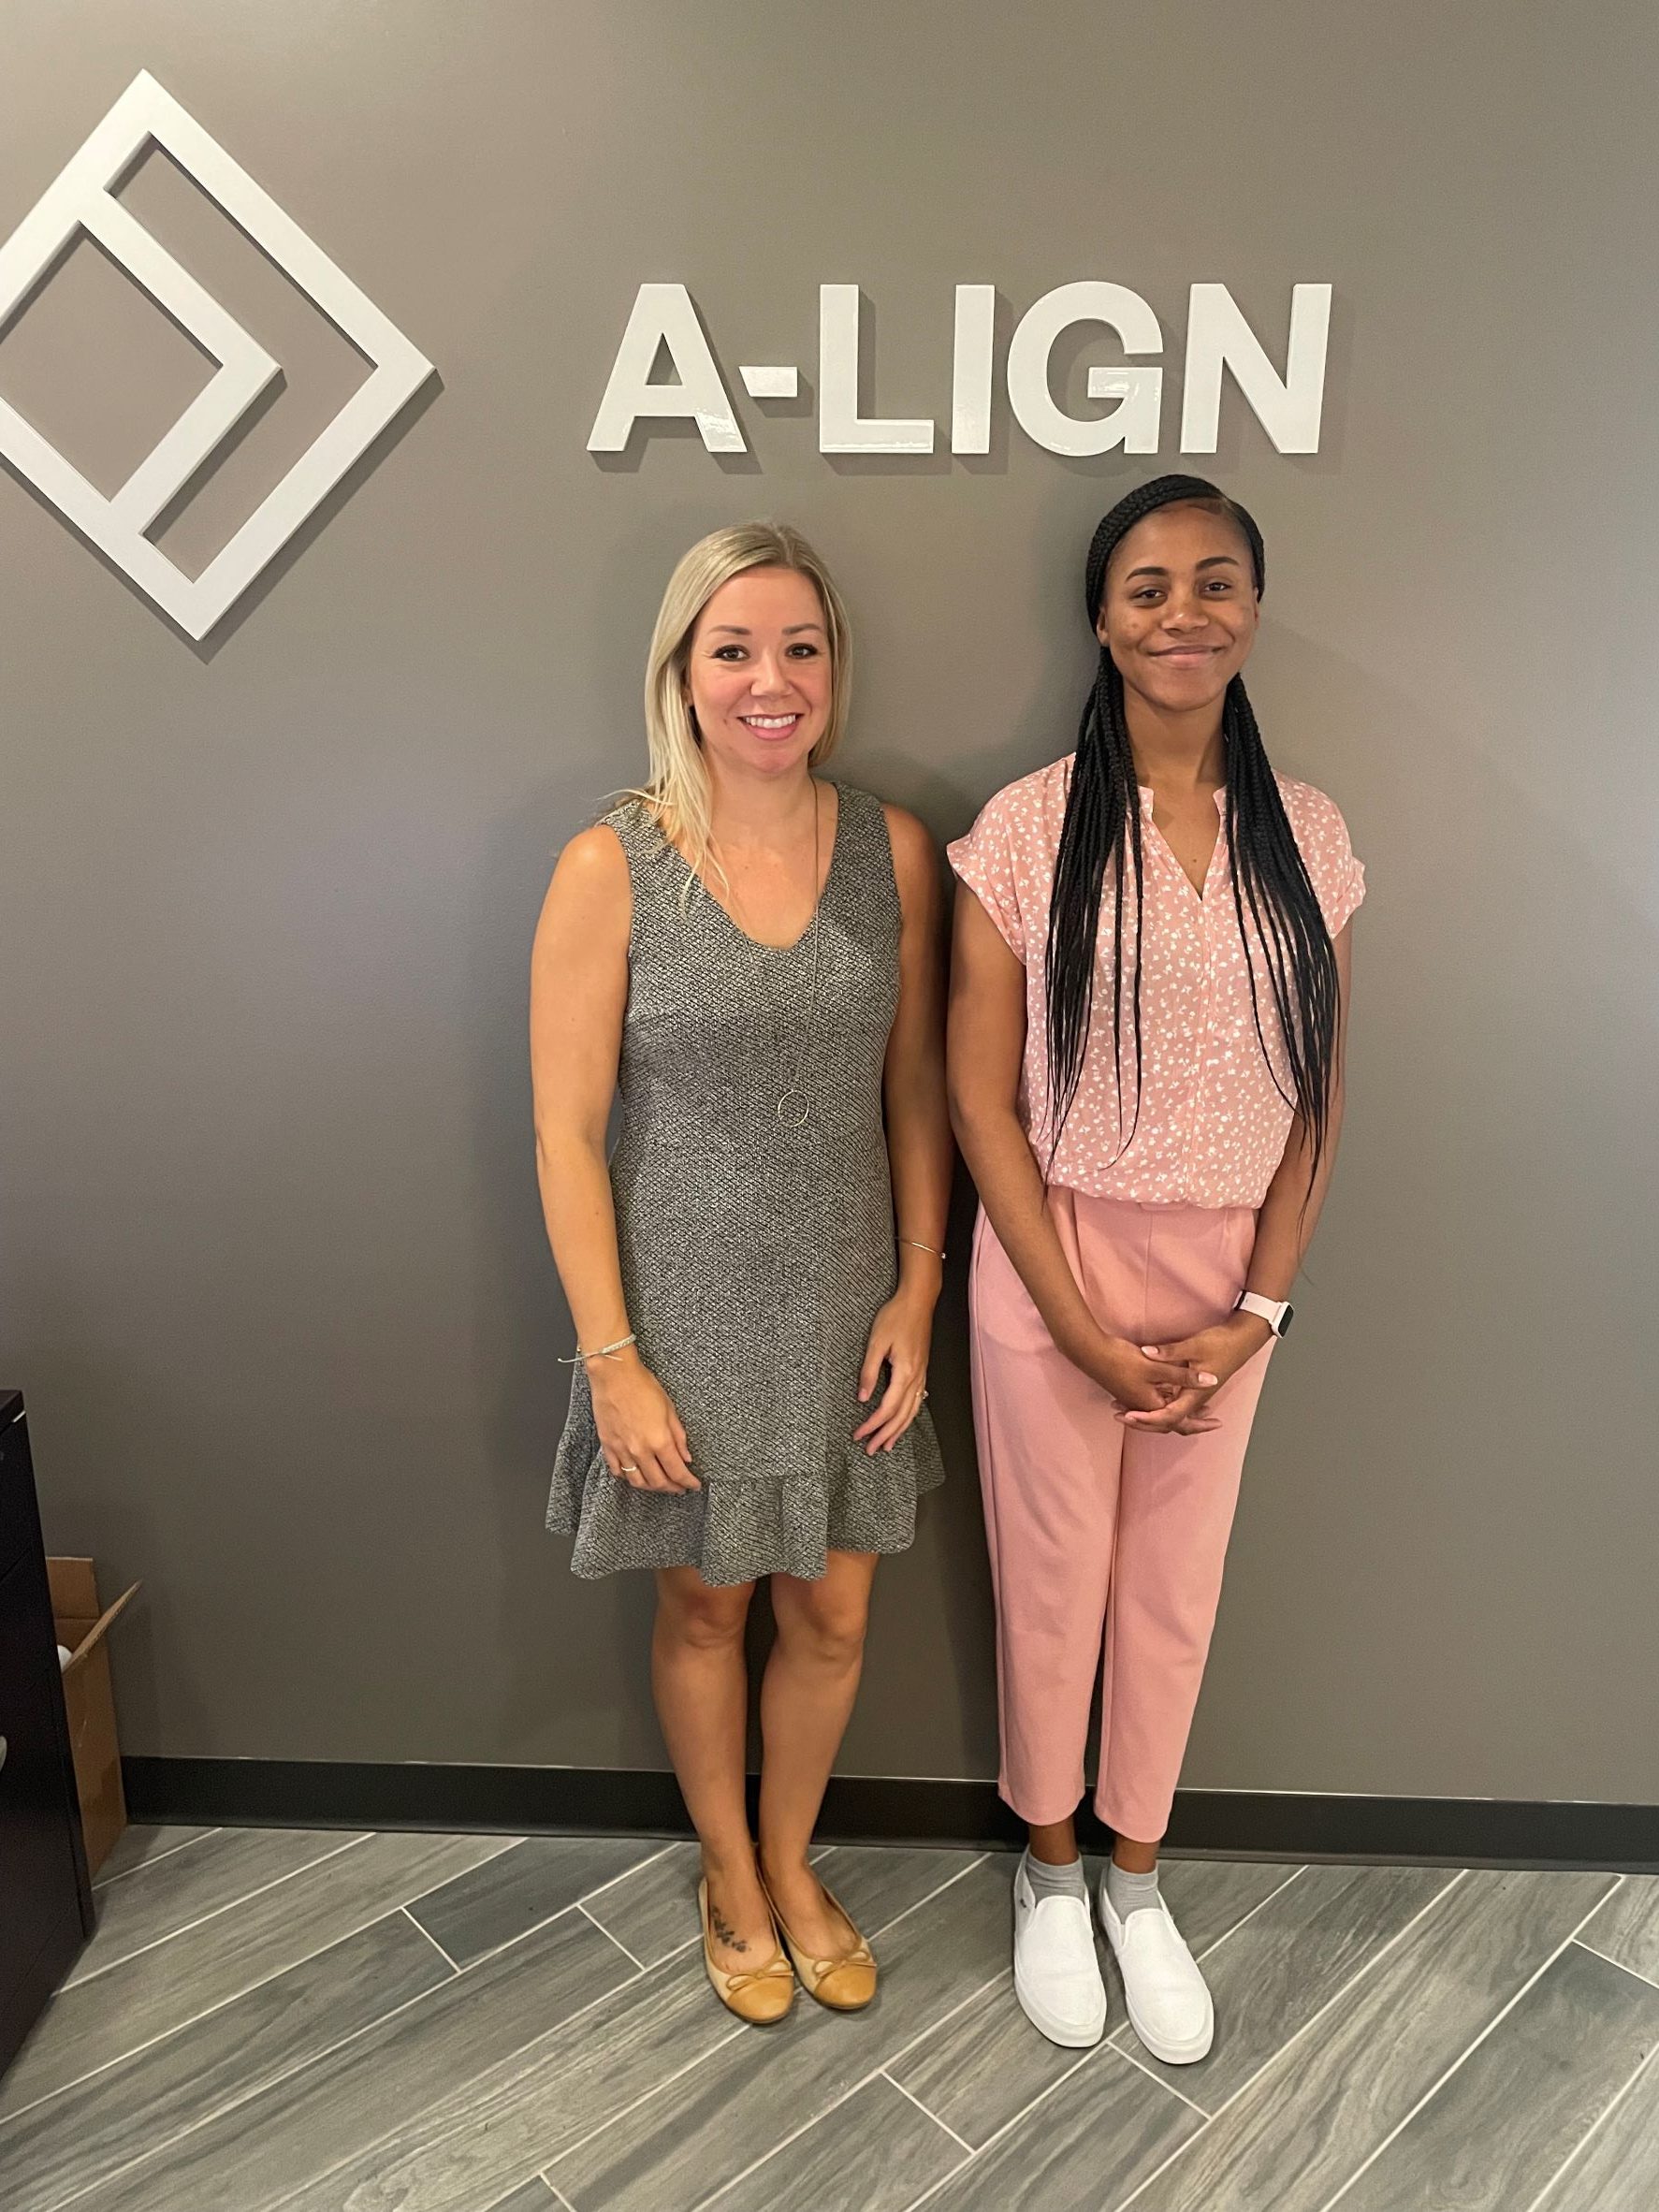 Female adult with her mentee standing in front of A-LIGN sign